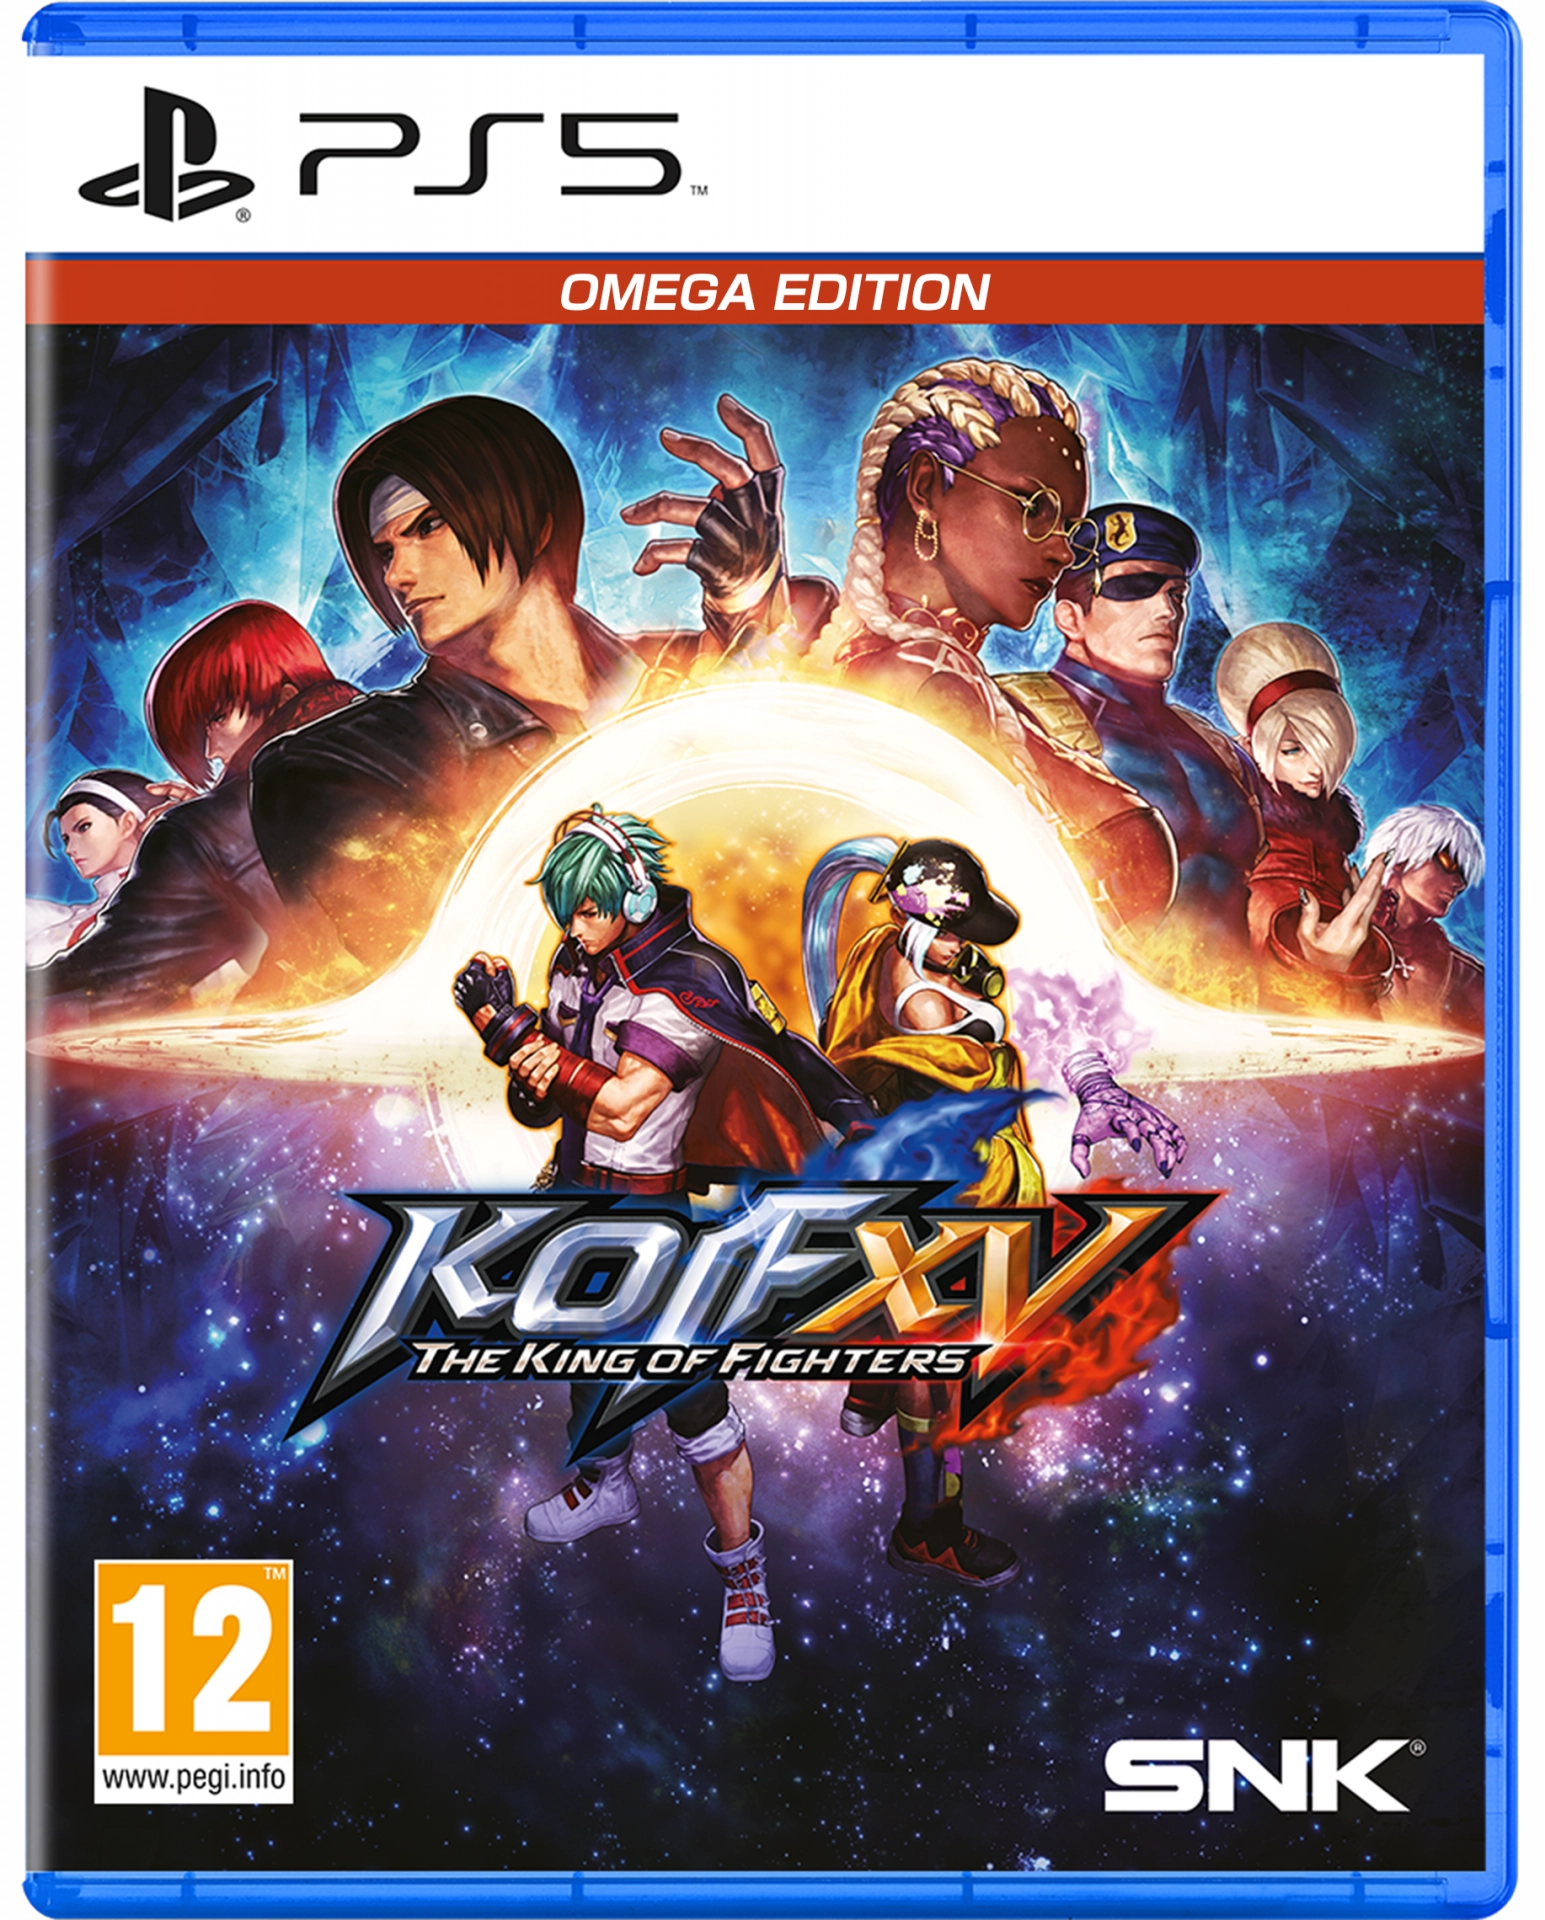 King of Fighters XV - Omega Edition